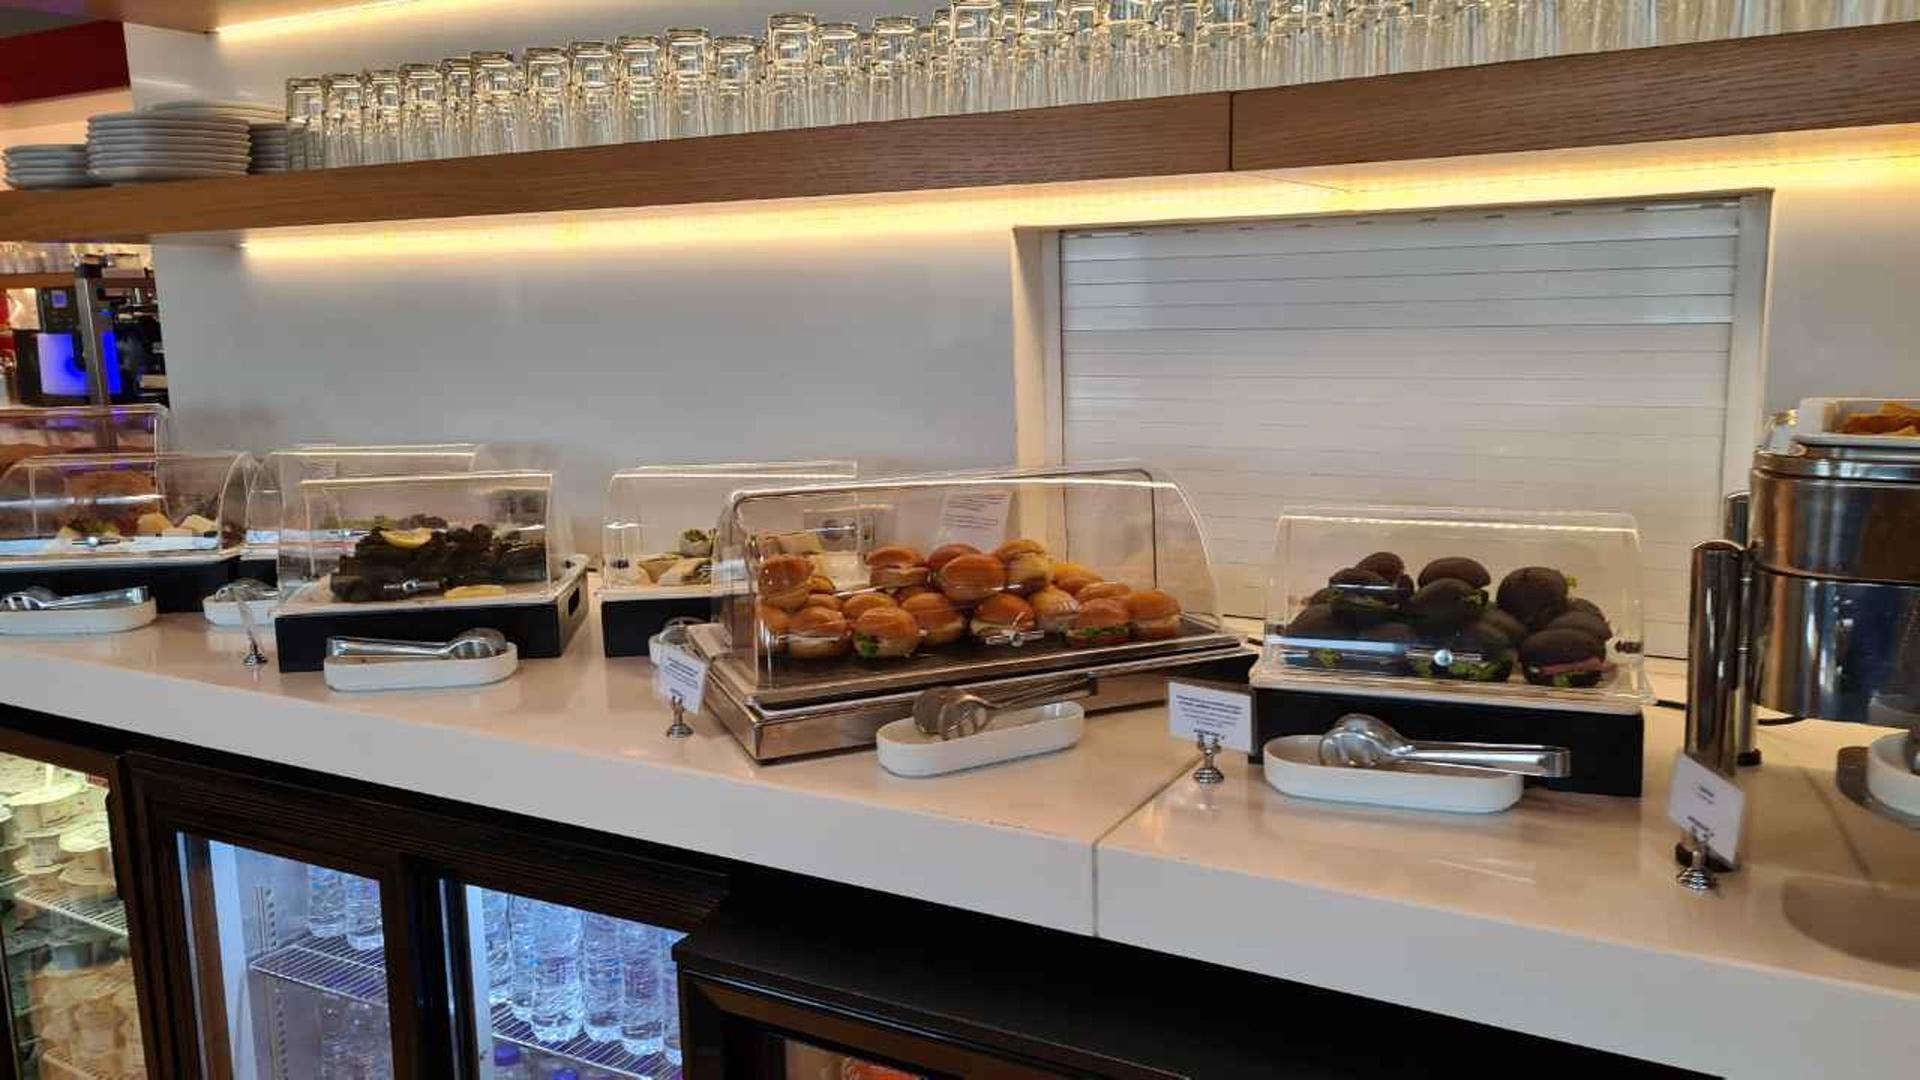 Aegean Business Lounge image 12 of 12